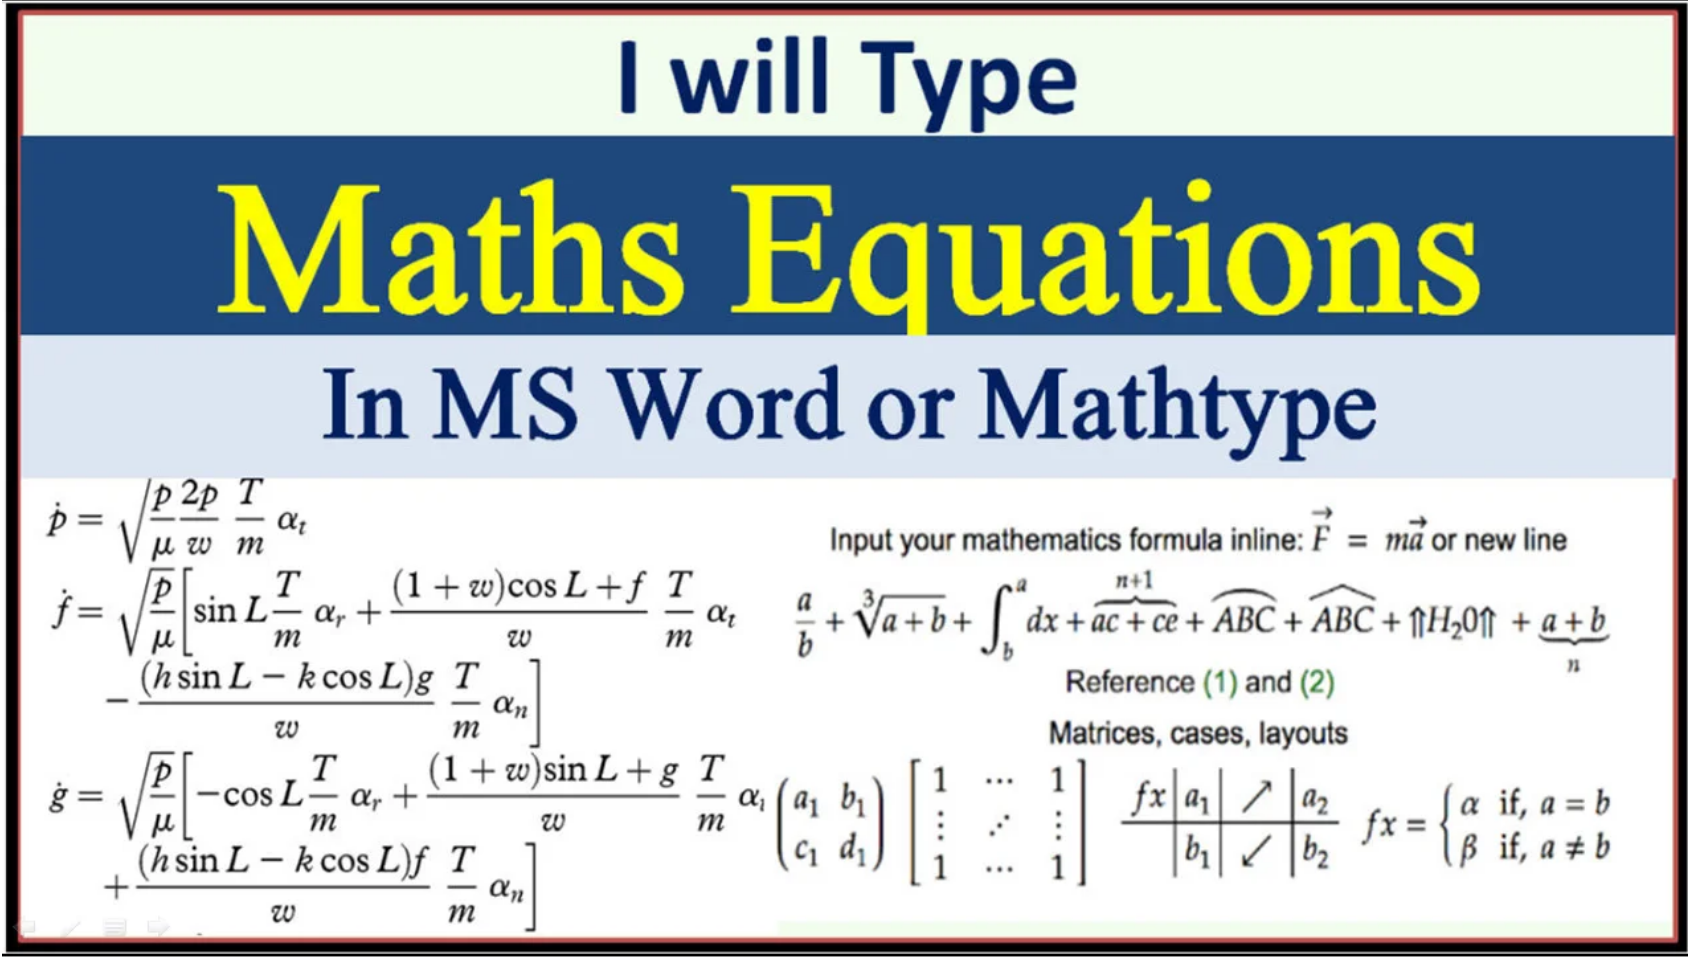 80459I will type math equations using equation editor or ms word